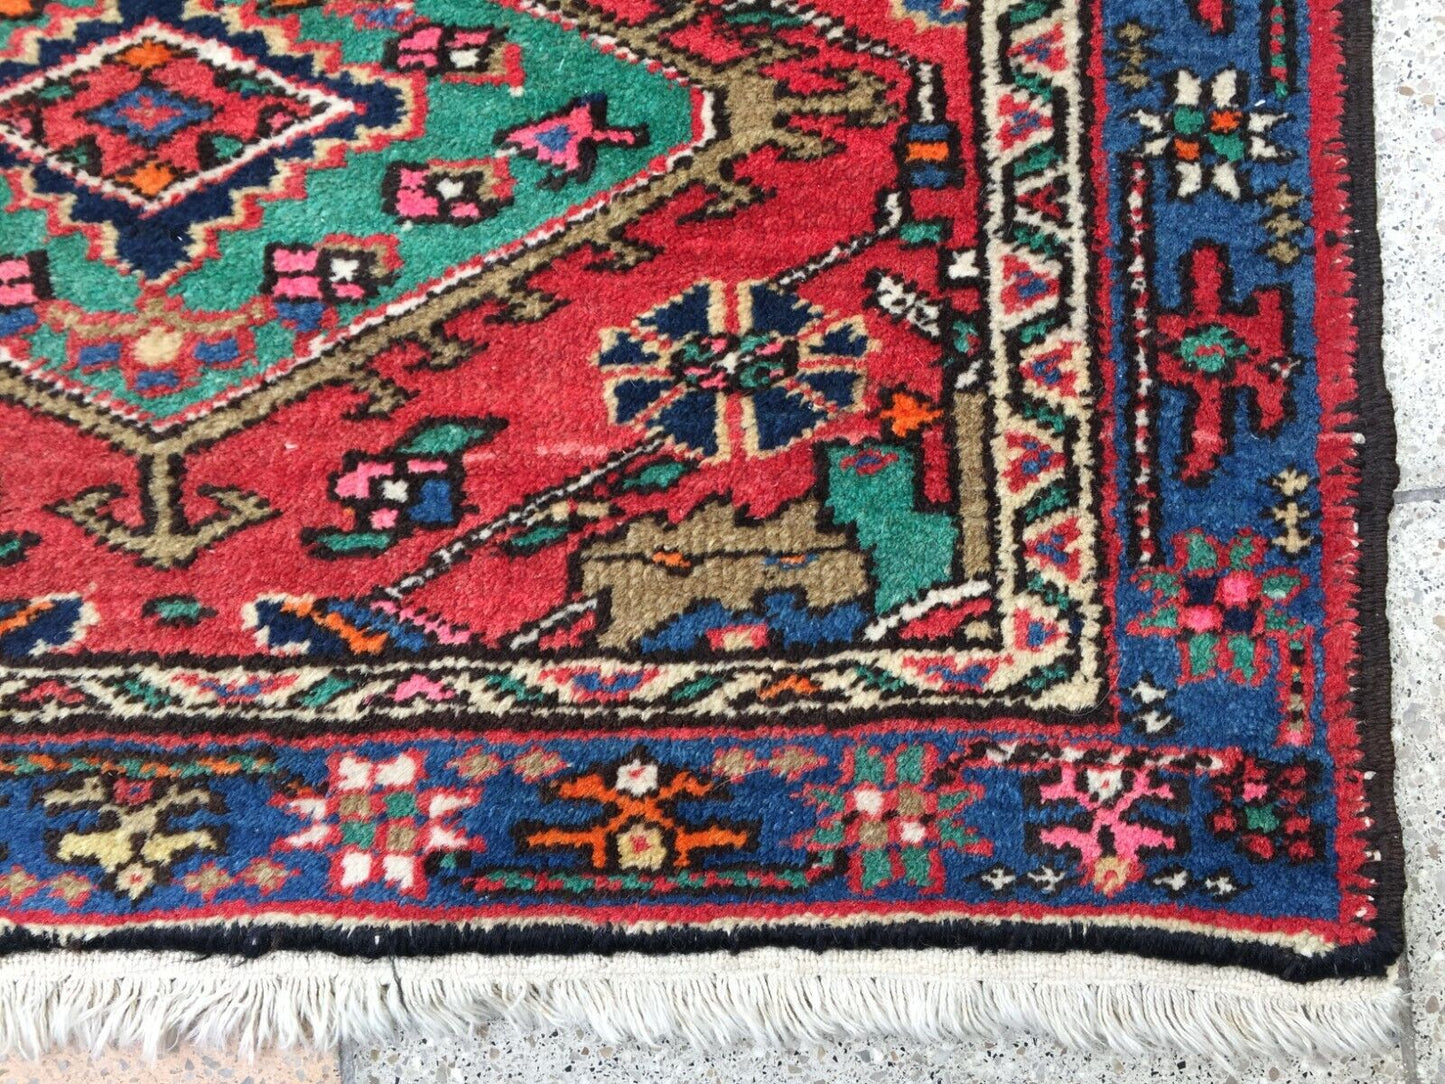 Dense Border with Complex Patterns Including Flowers on Handmade Hamadan Rug - 1960s